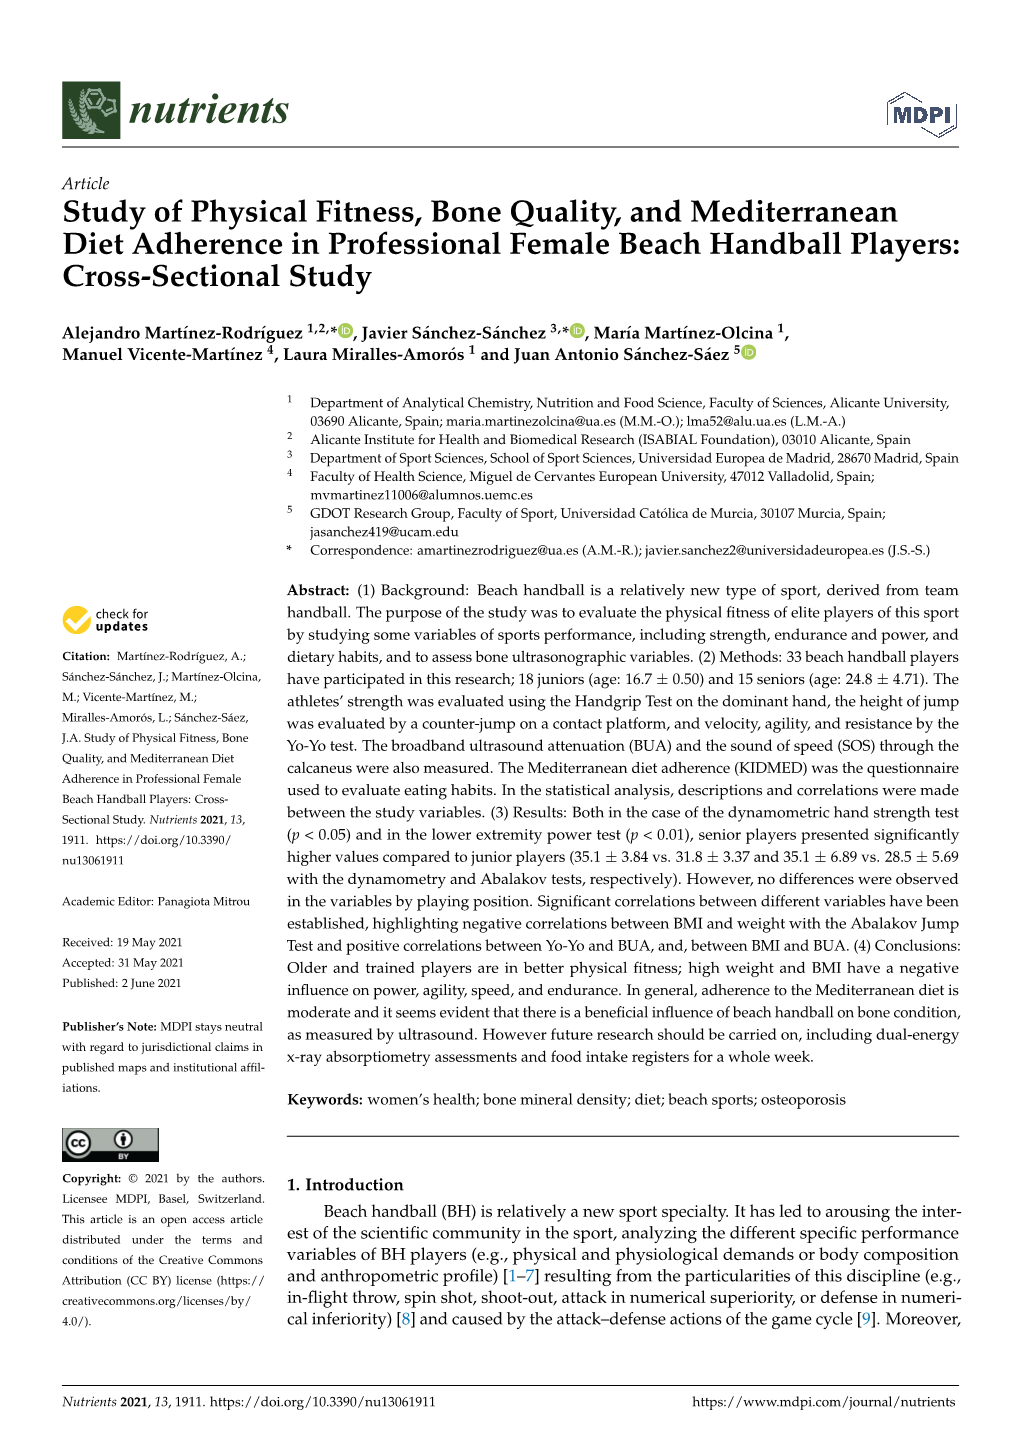 Study of Physical Fitness, Bone Quality, and Mediterranean Diet Adherence in Professional Female Beach Handball Players: Cross-Sectional Study